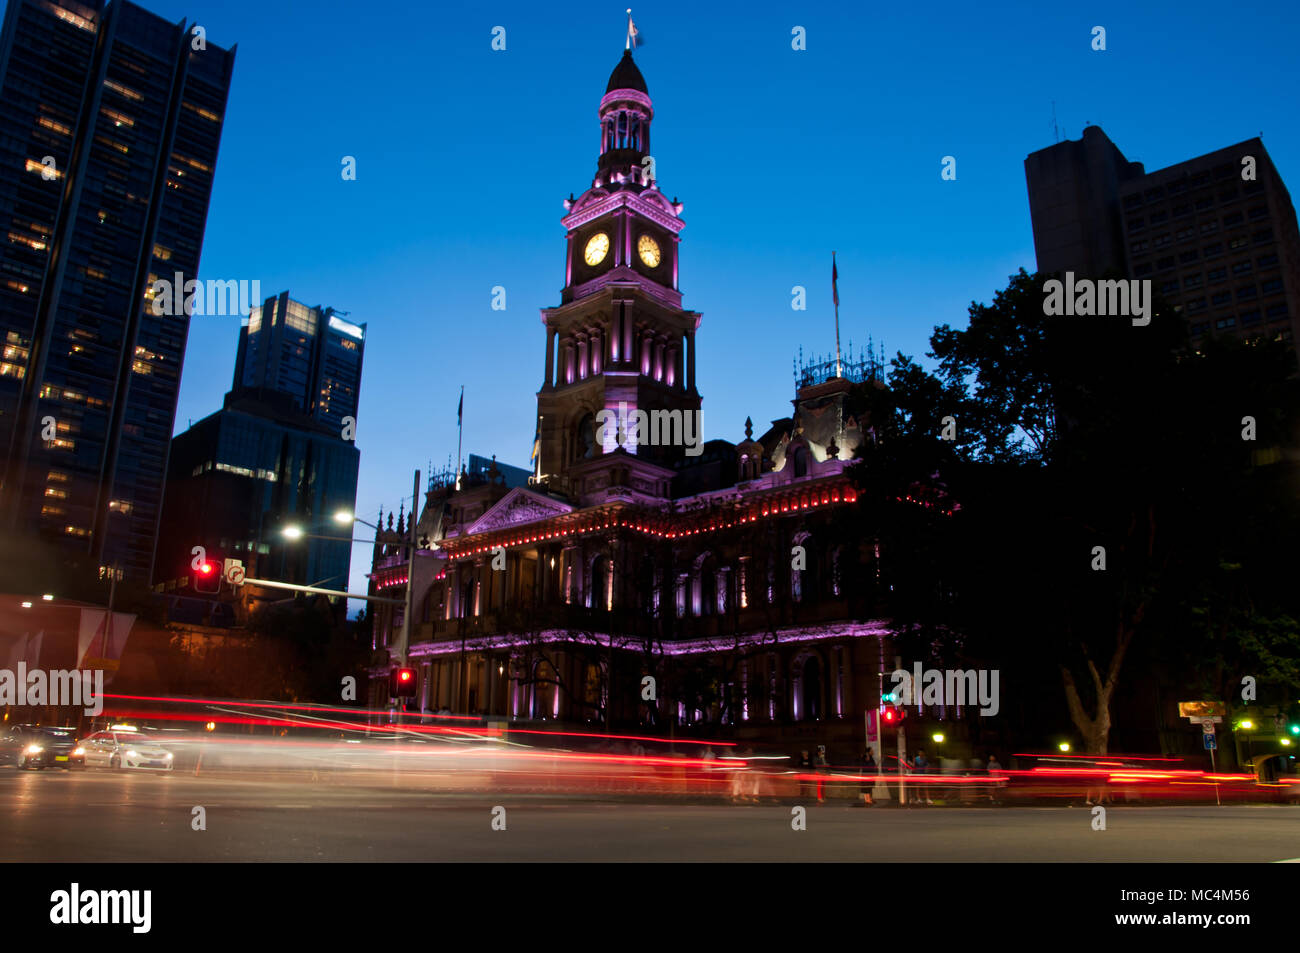 Light moving of bustling city center scene with old clock tower in Sydney Stock Photo